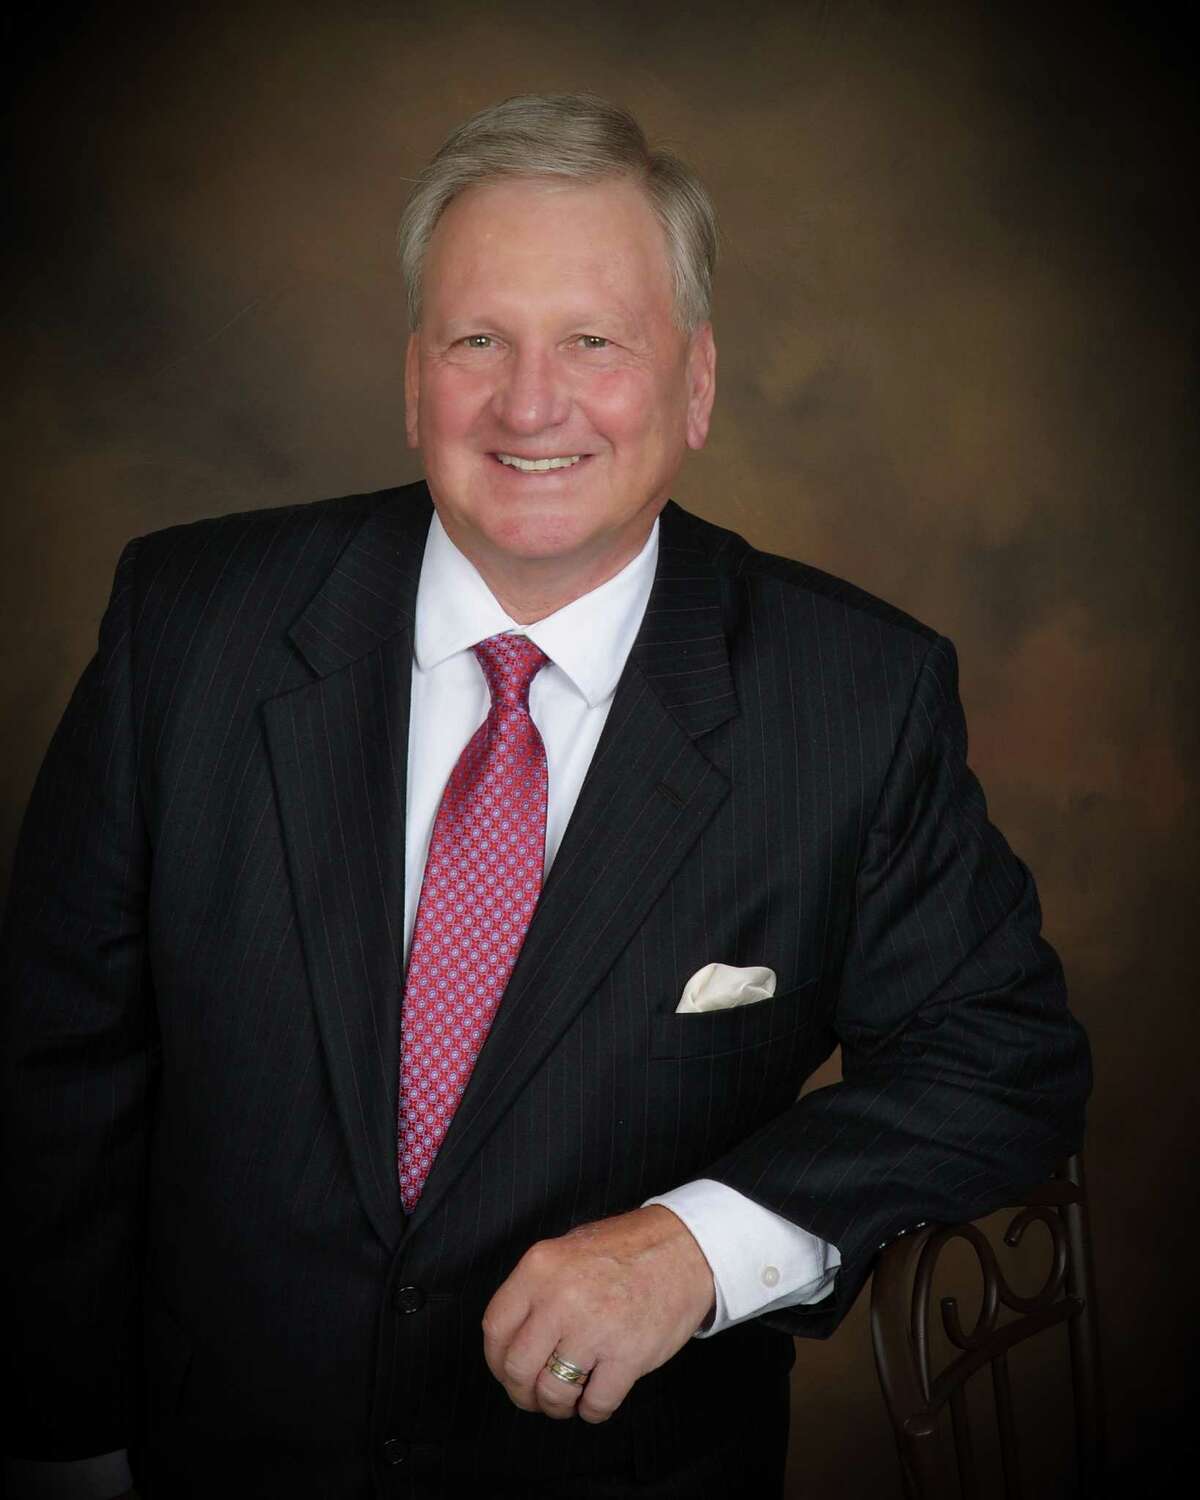 After 40 years in the oil and gas sector, Bruce Carlile has established Carlile Commodity Consulting as founder and president. His firm specializes in the testing, inspection and certification of a variety of commodities.